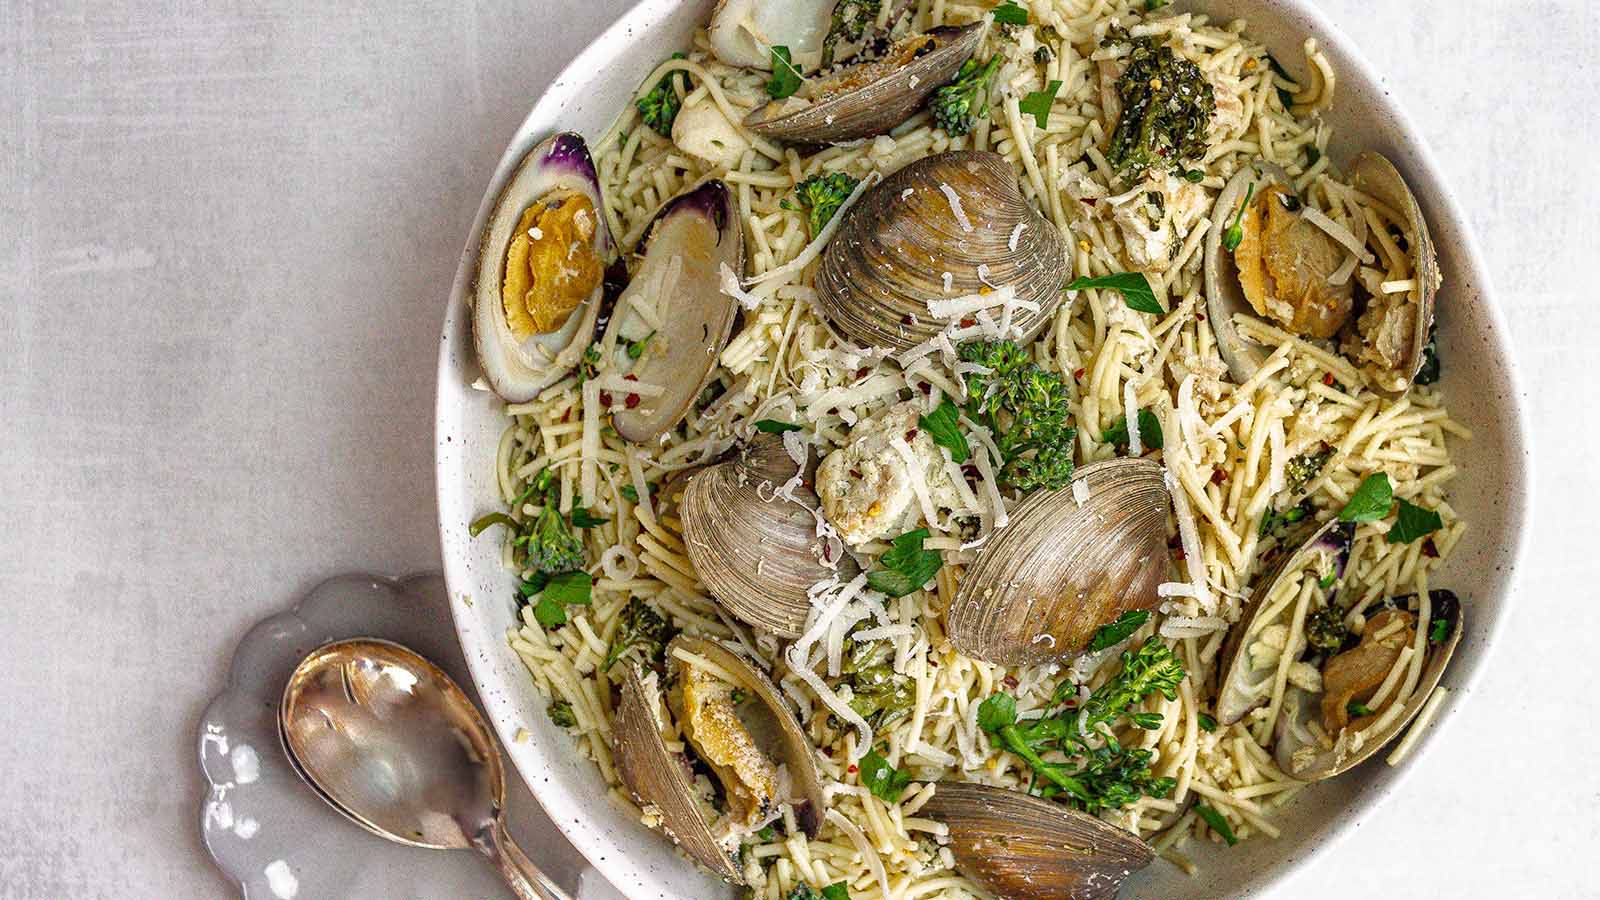 Gourmend recipe for low fodmap spaghettini with clams and white fish